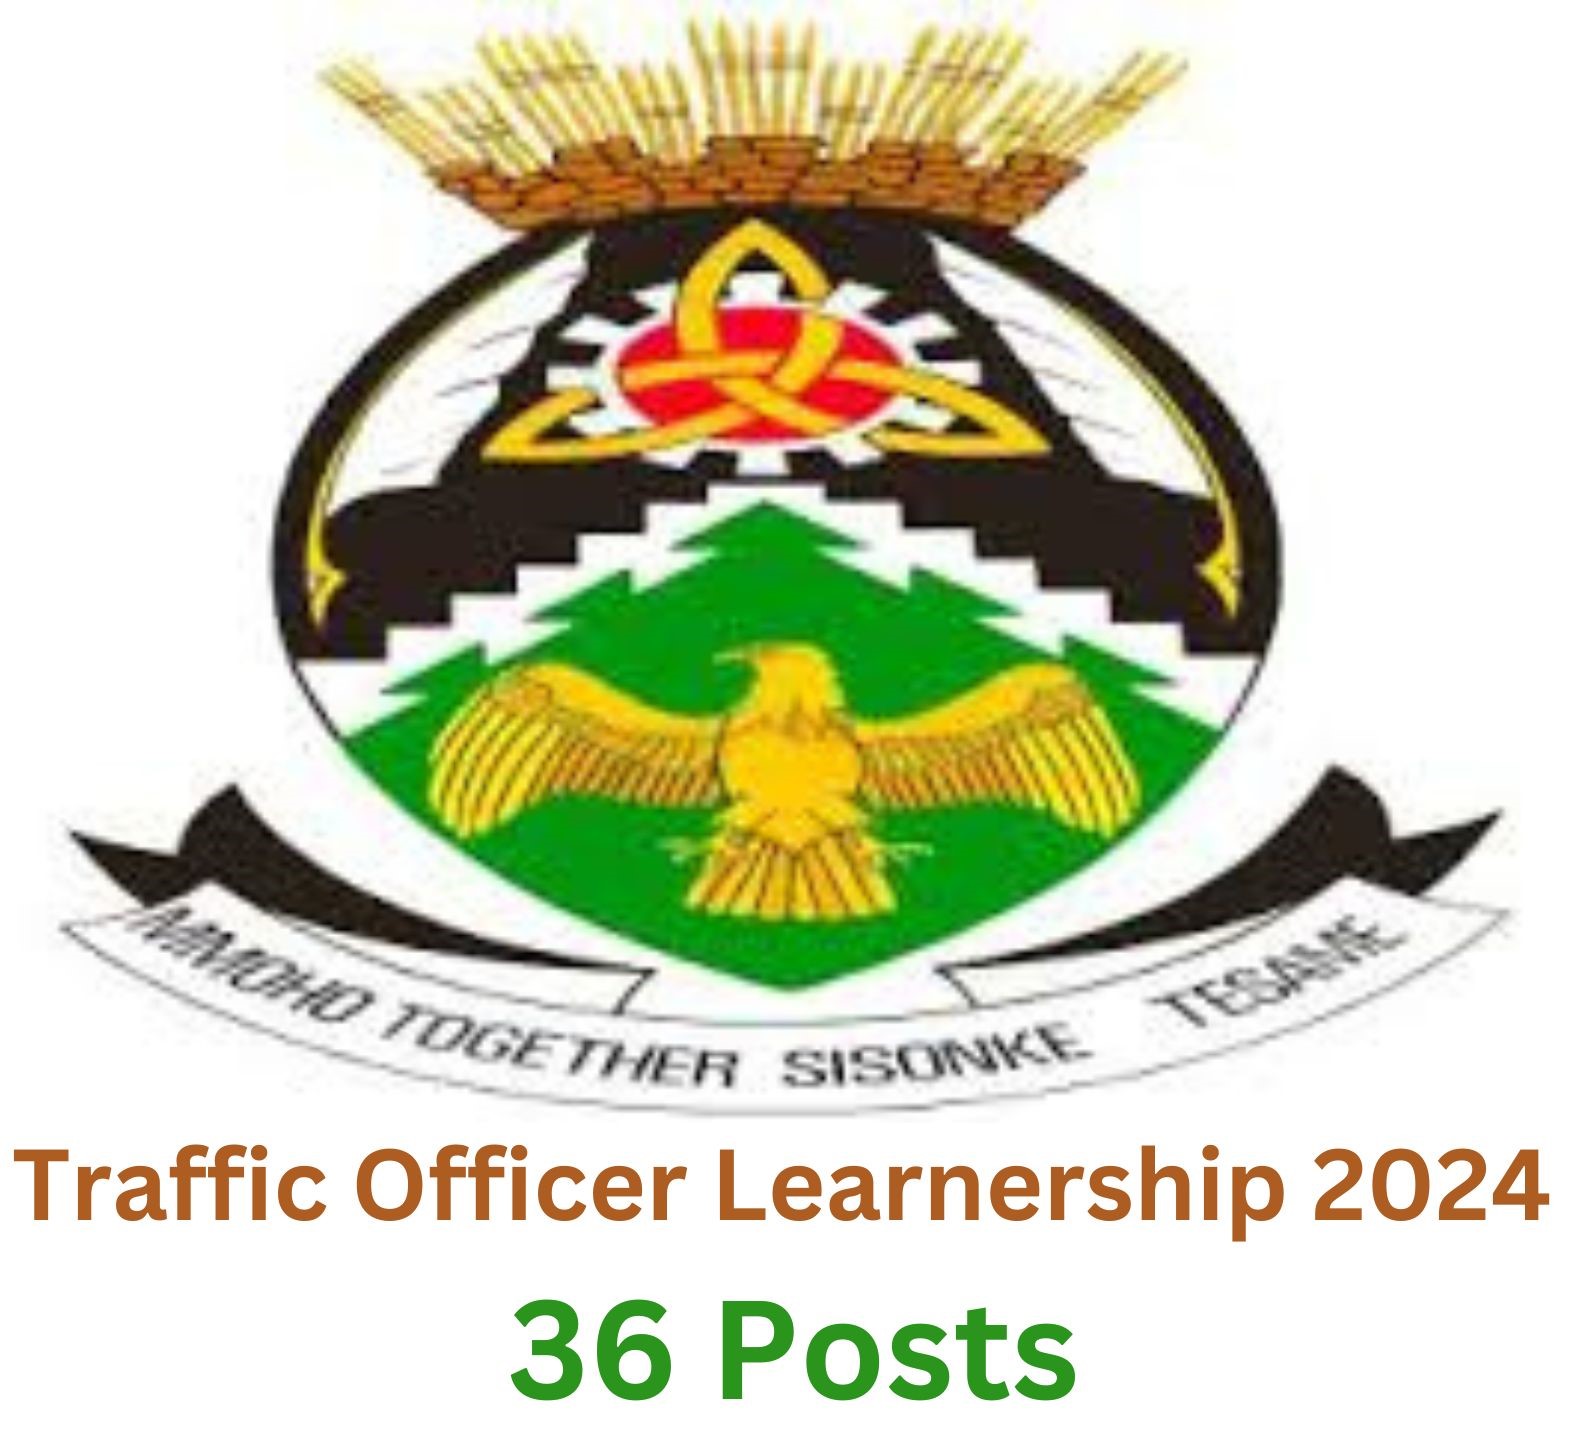 Traffic Officer Learnership 2024, 36 Posts: Eligibility, Document, How To Apply